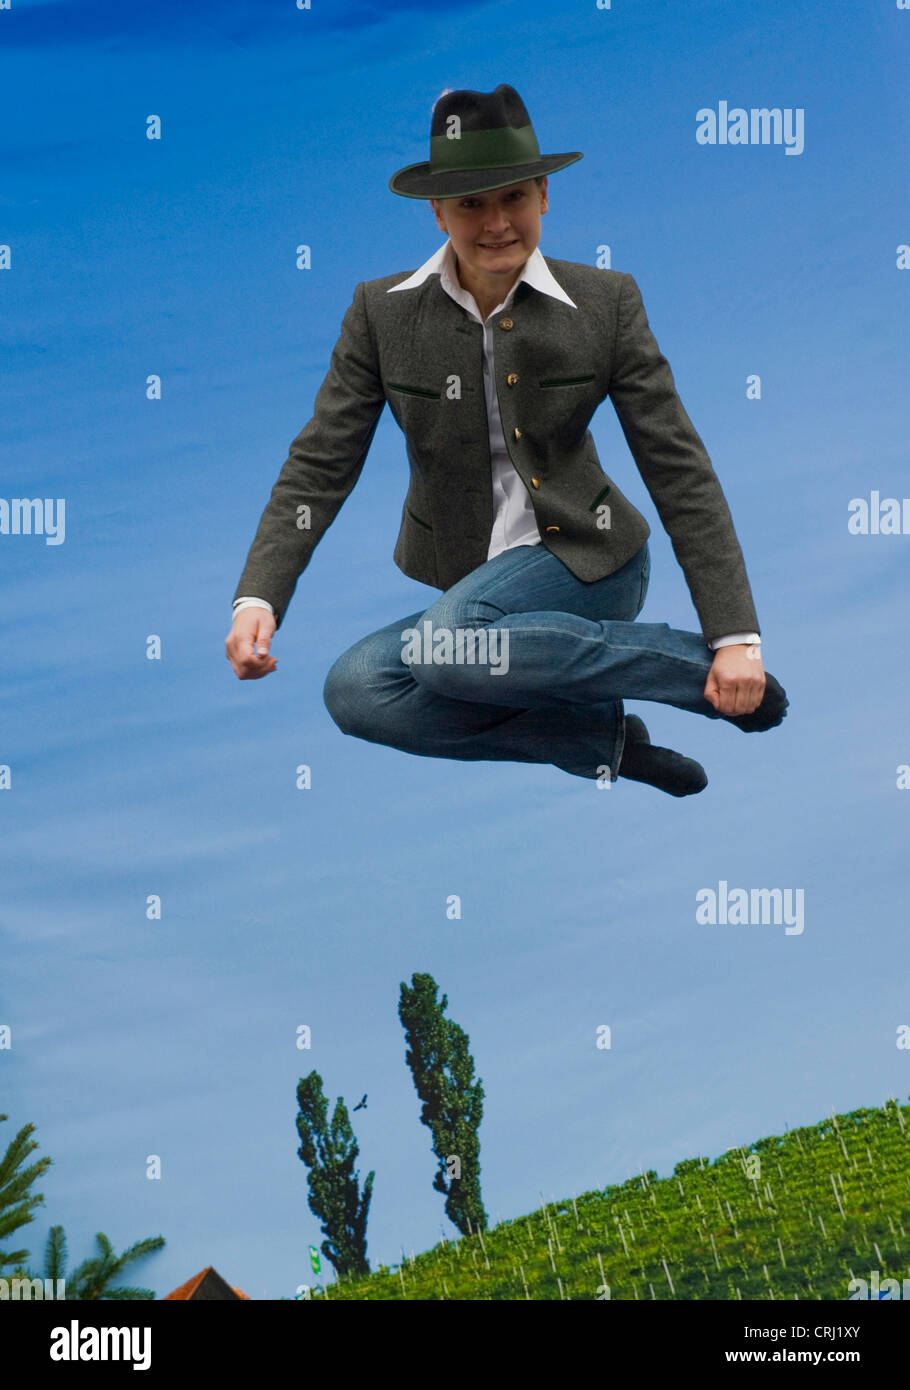 jumping Styrian person on trampoline, Austria, Styria Stock Photo